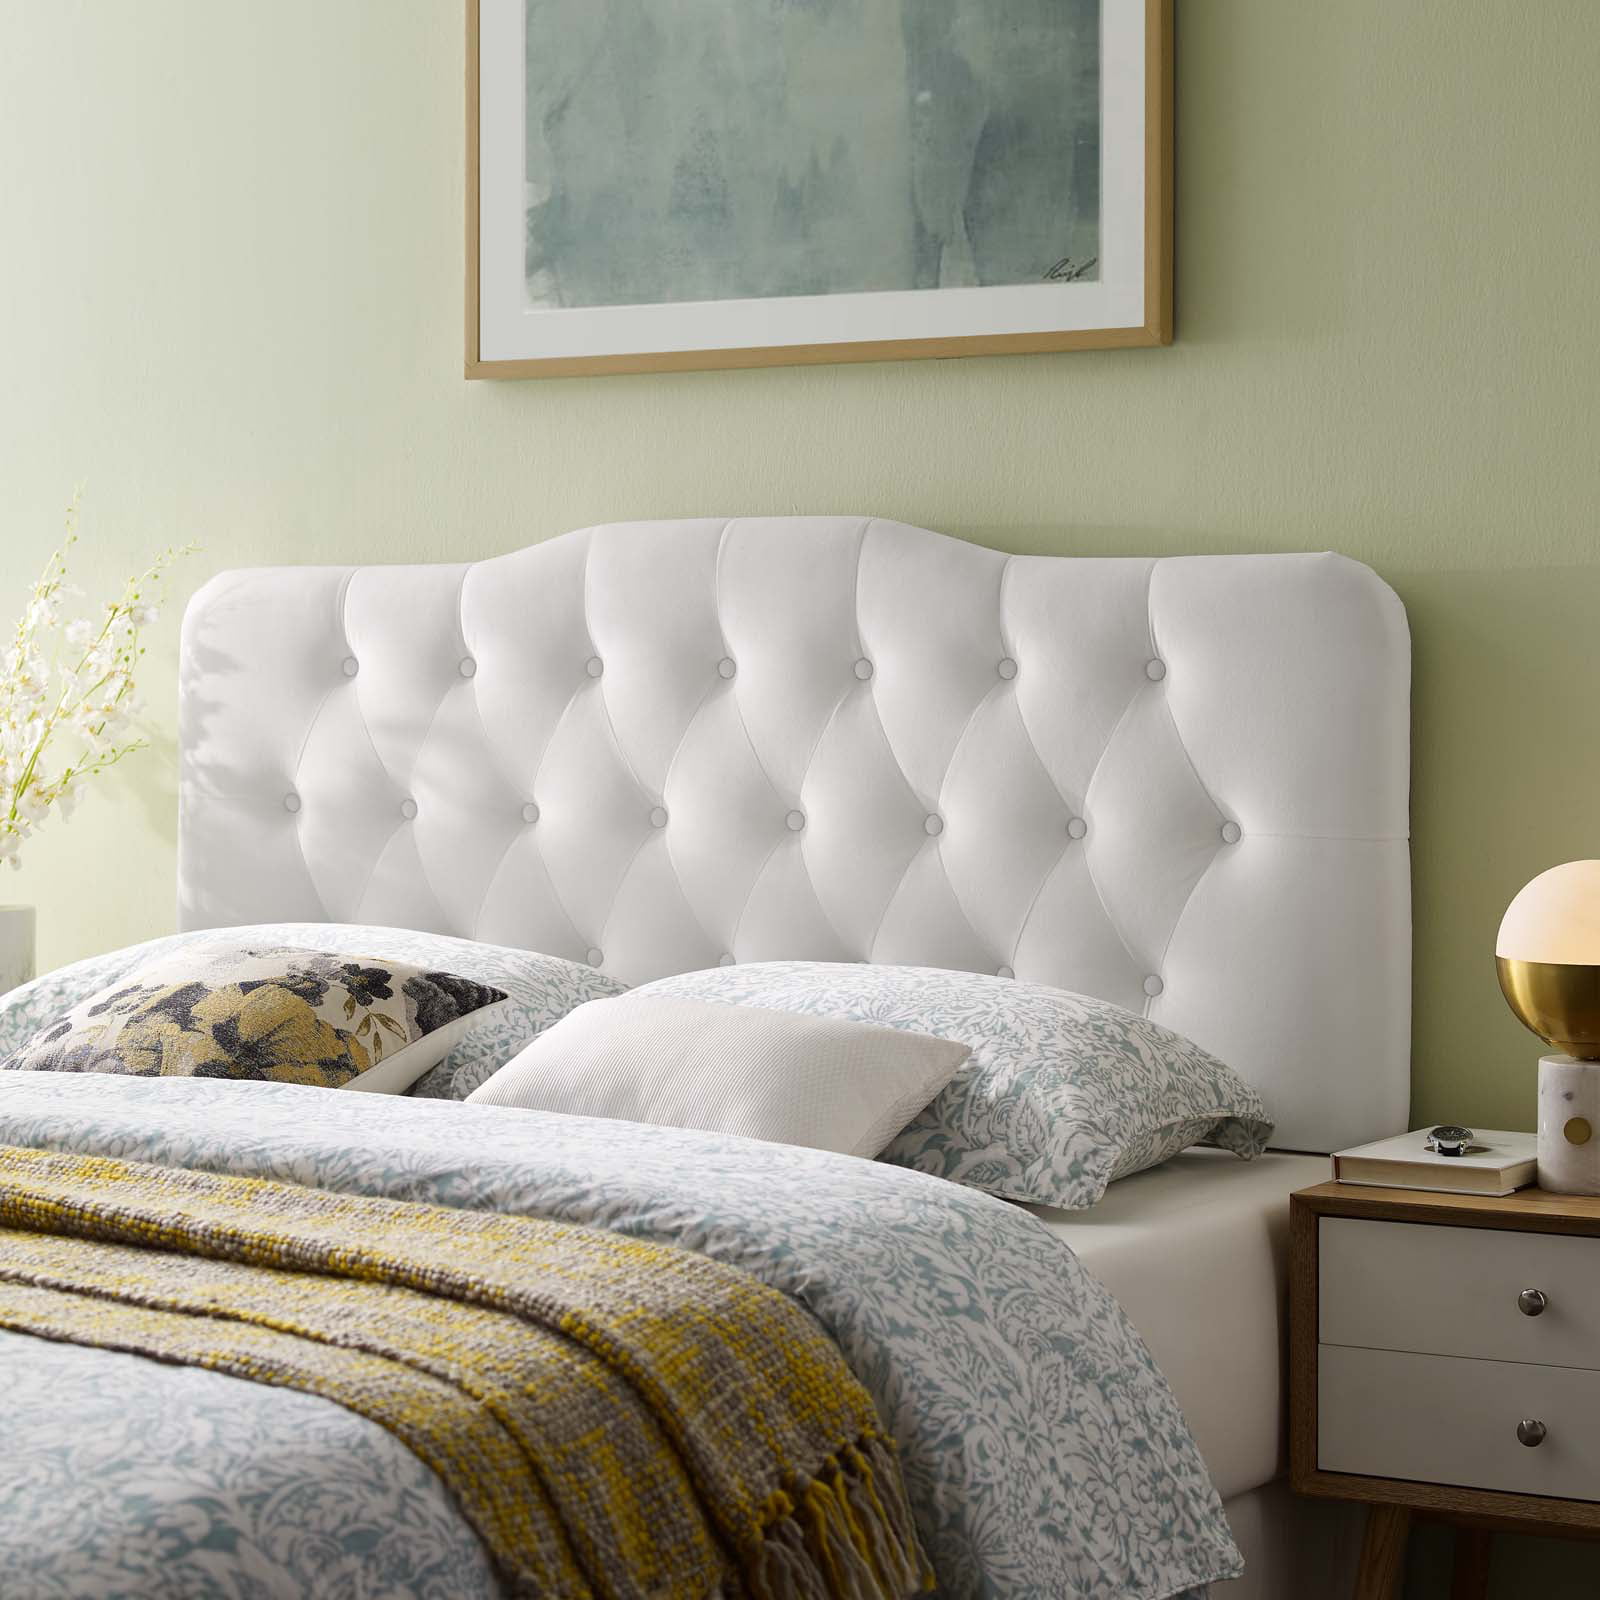 Details about   Madison Headboard in Multiple Colors and Sizes 